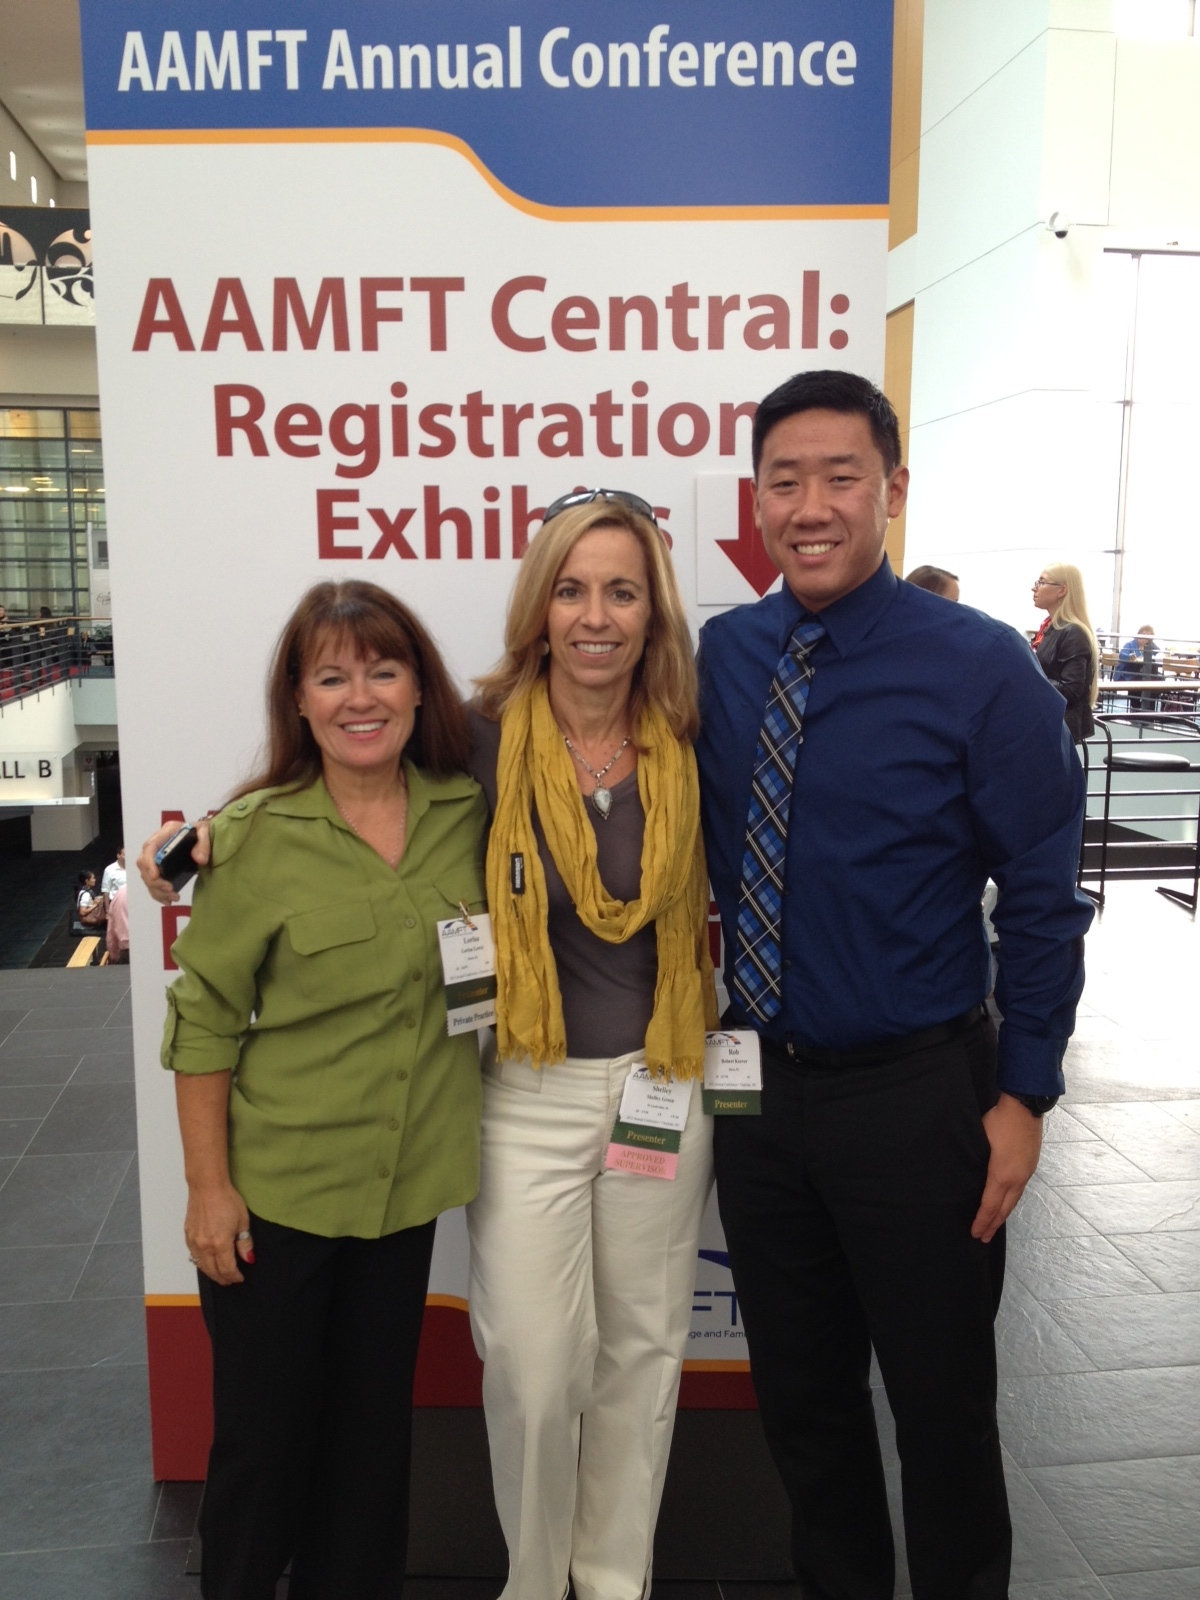 SHSS Faculty and Student Present on Equine Assisted Therapy at AAMFT